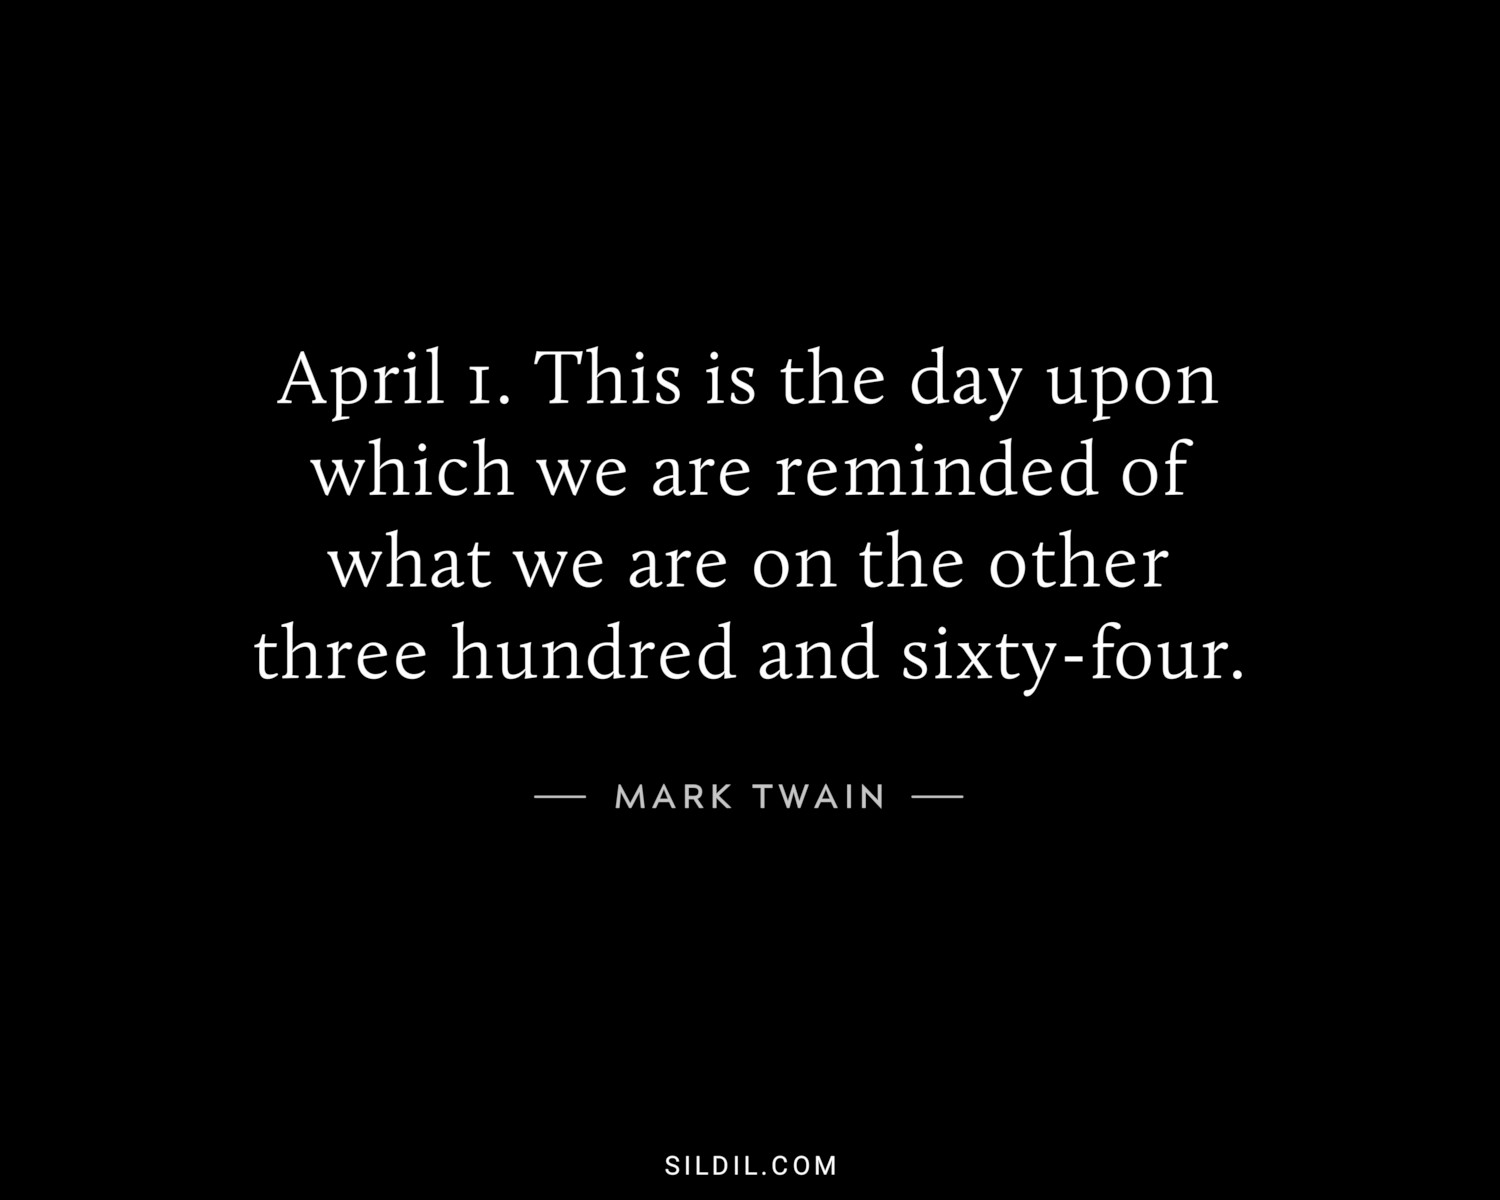 April 1. This is the day upon which we are reminded of what we are on the other three hundred and sixty-four.